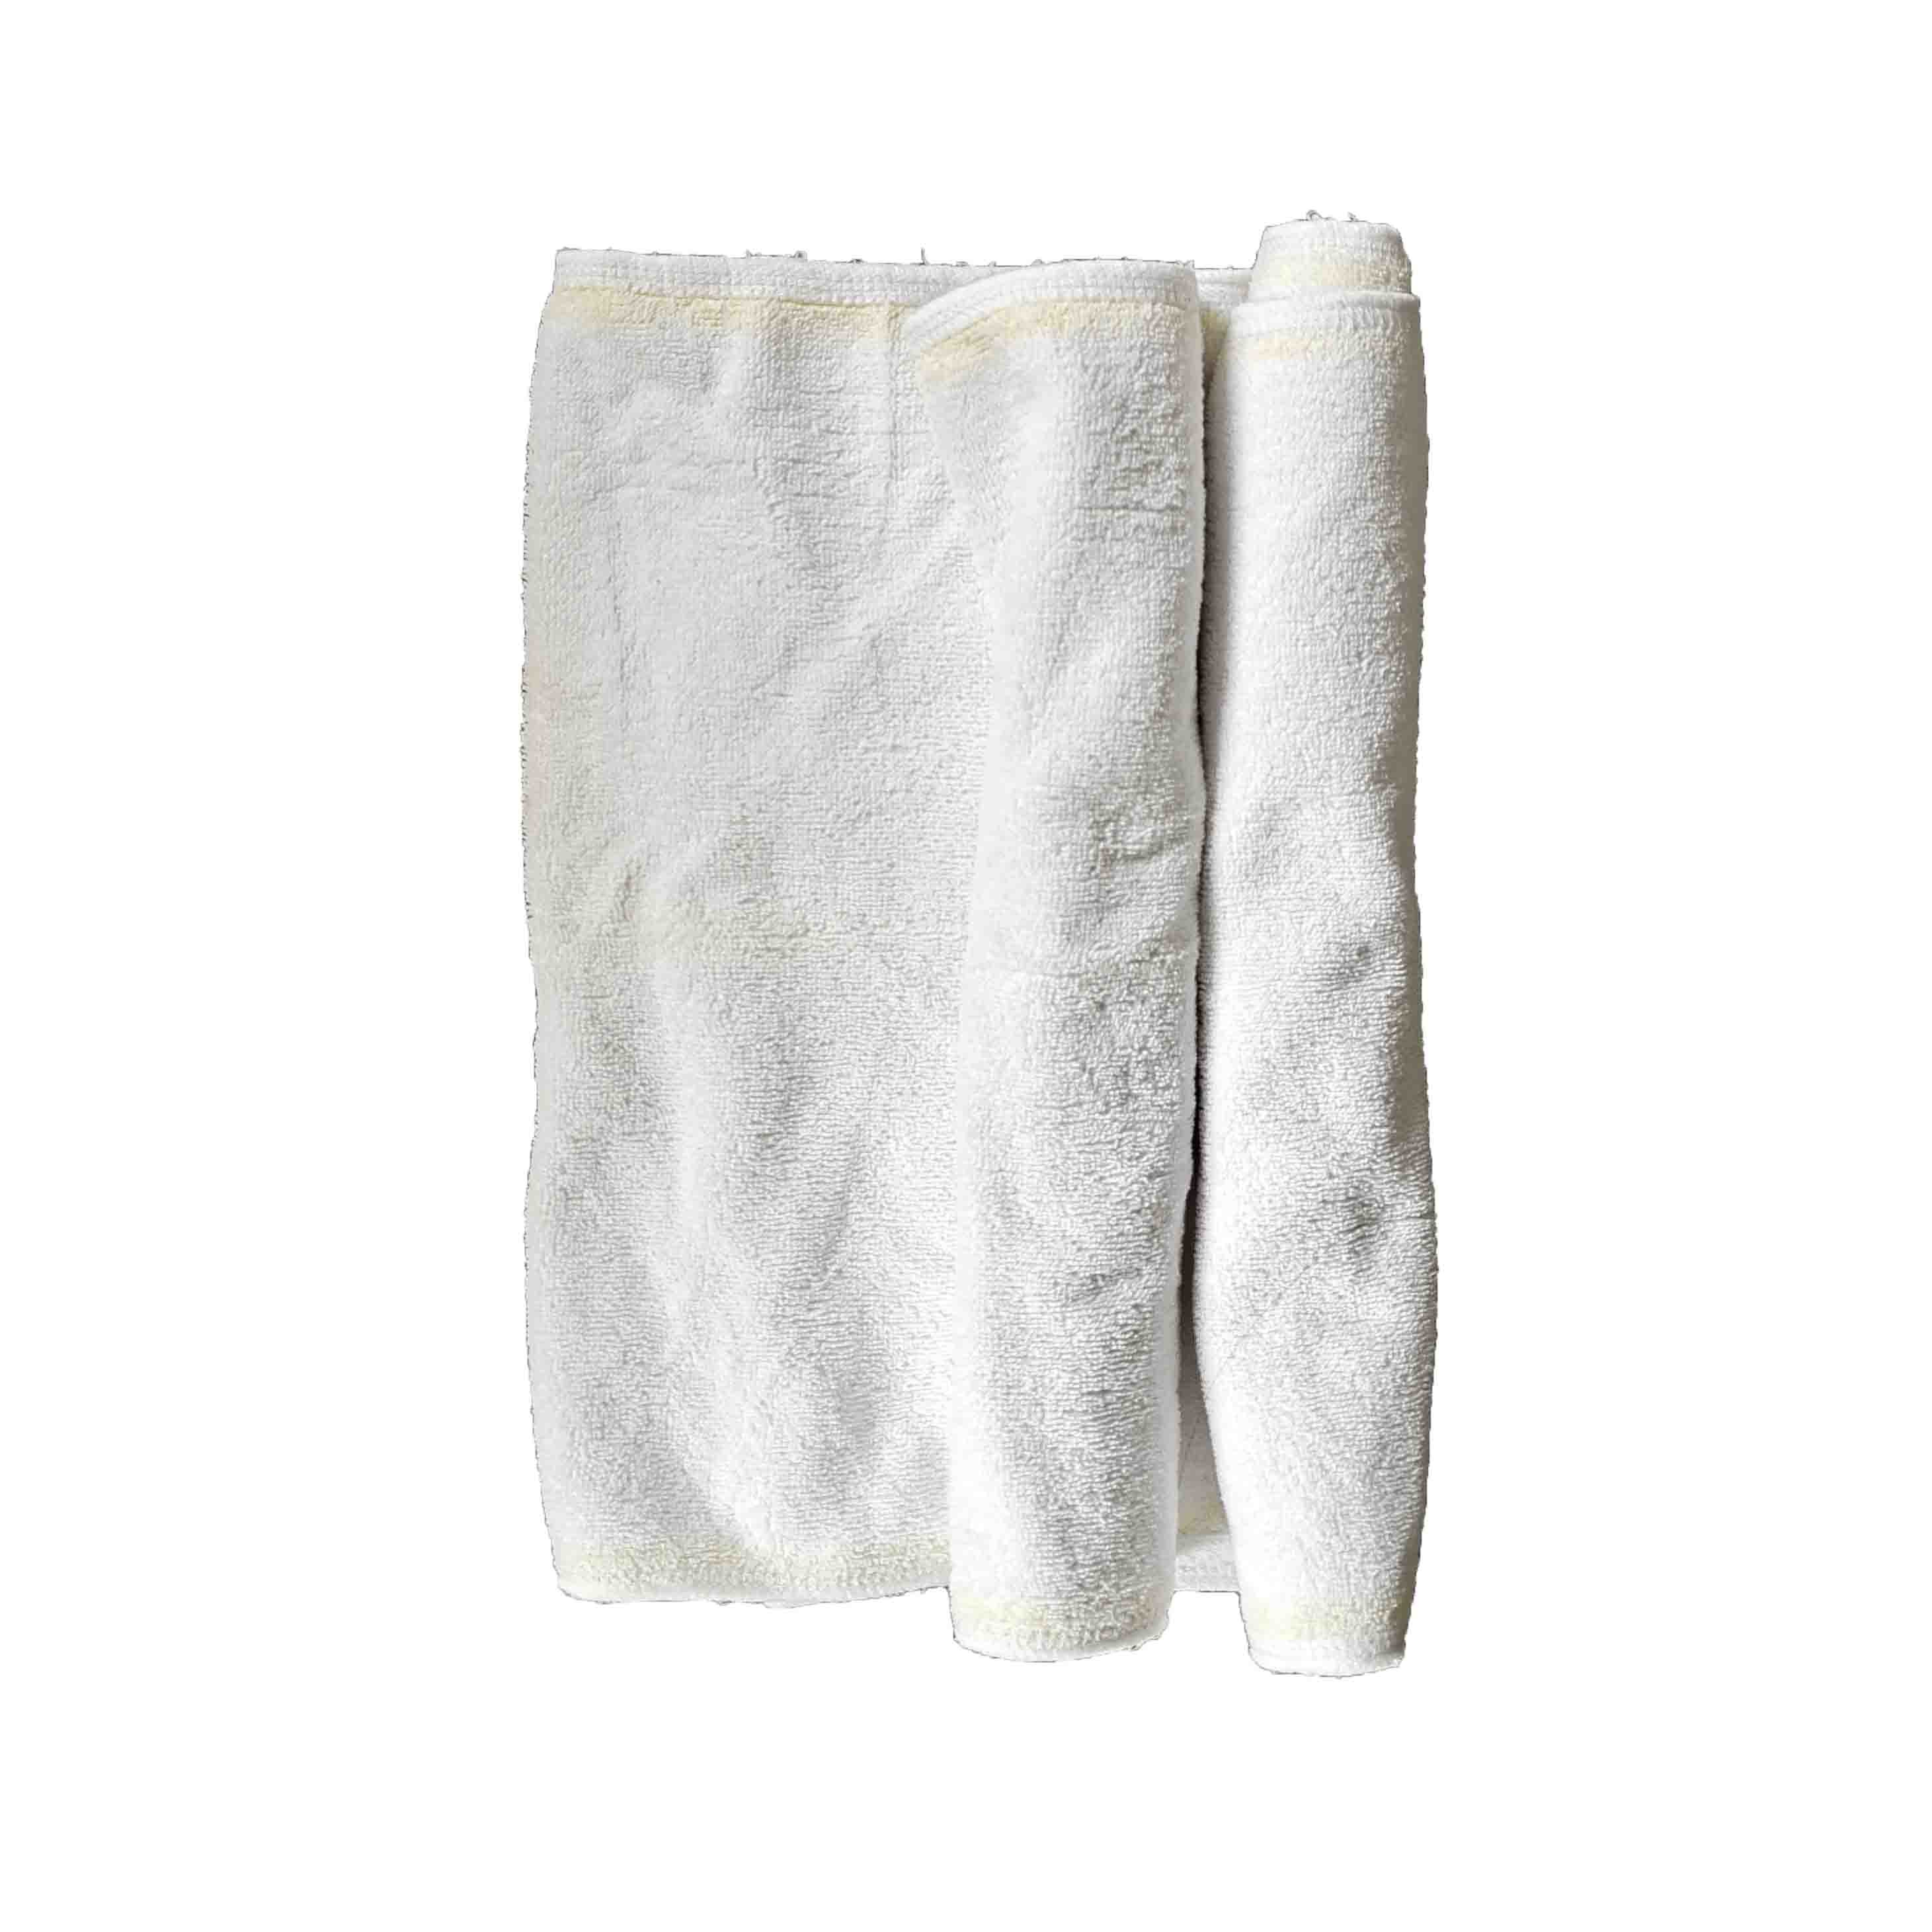 Strong Absorbency 50kg Recycled Shop Rags